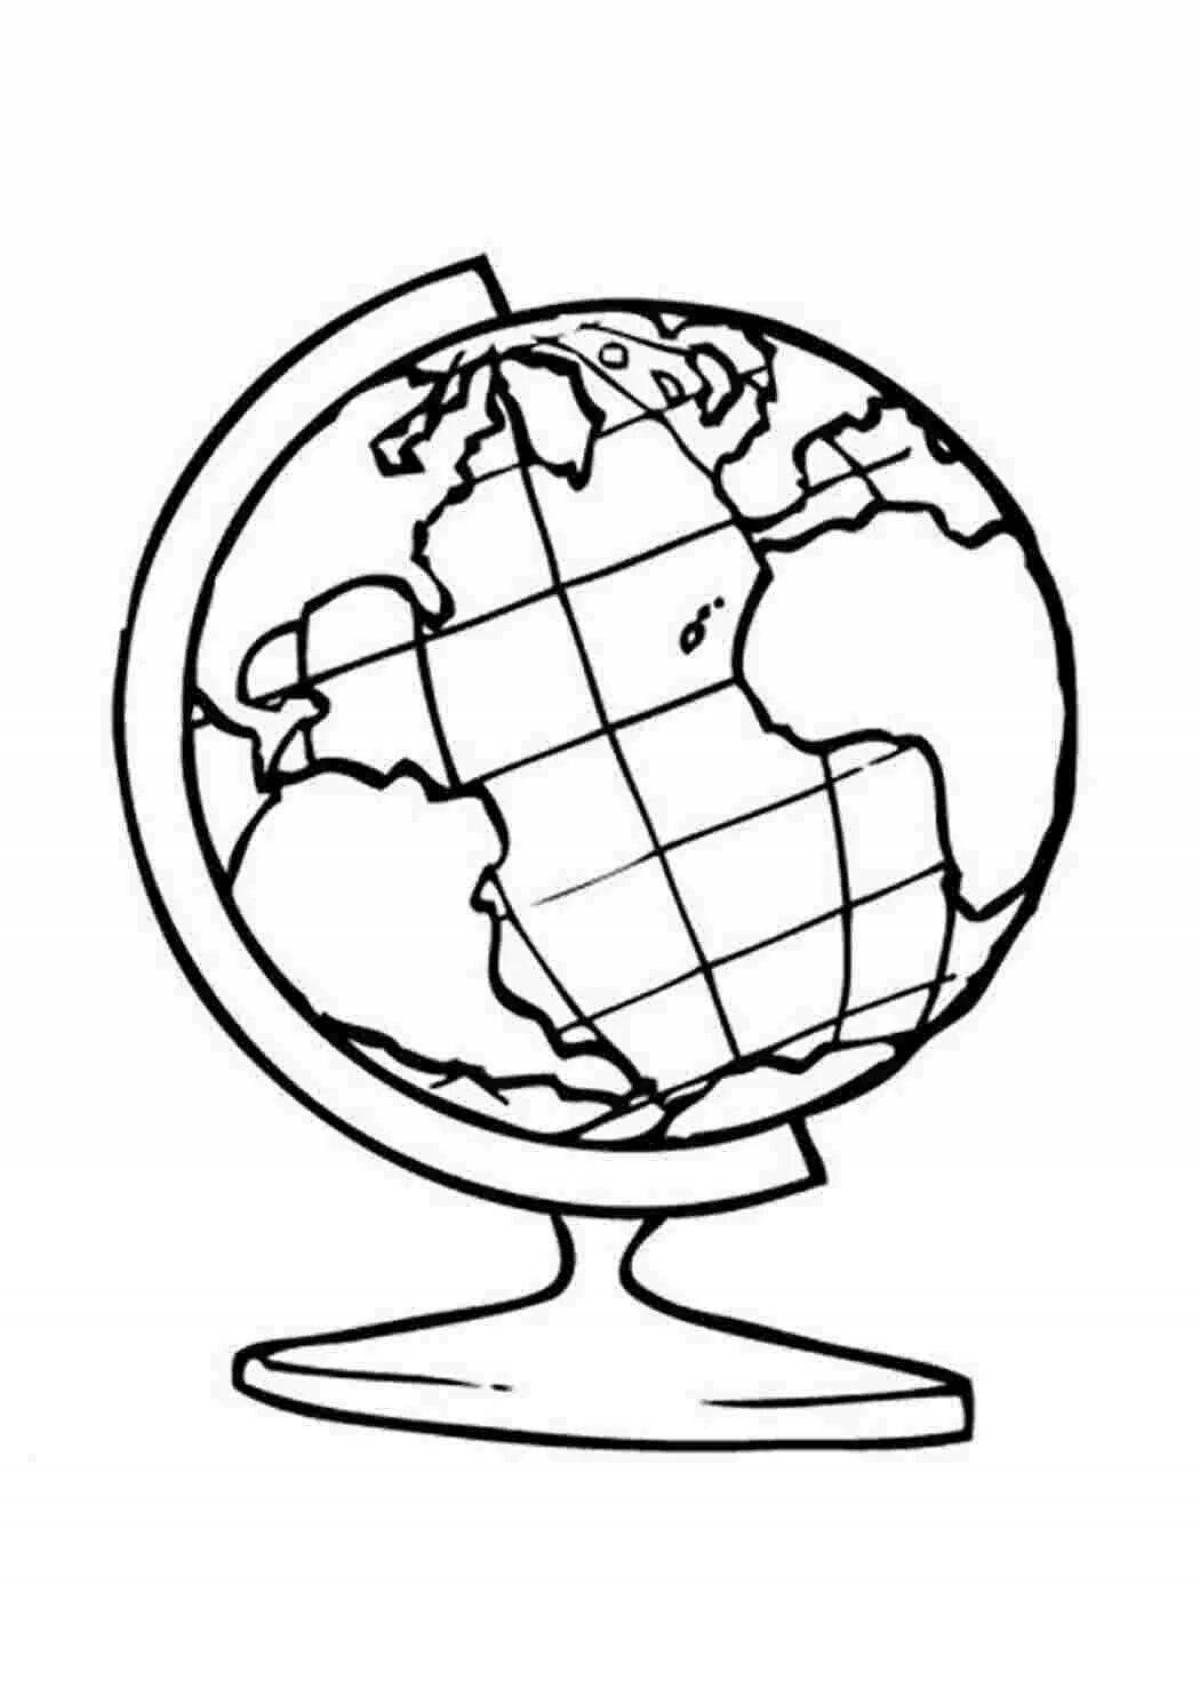 Sweet globe coloring page